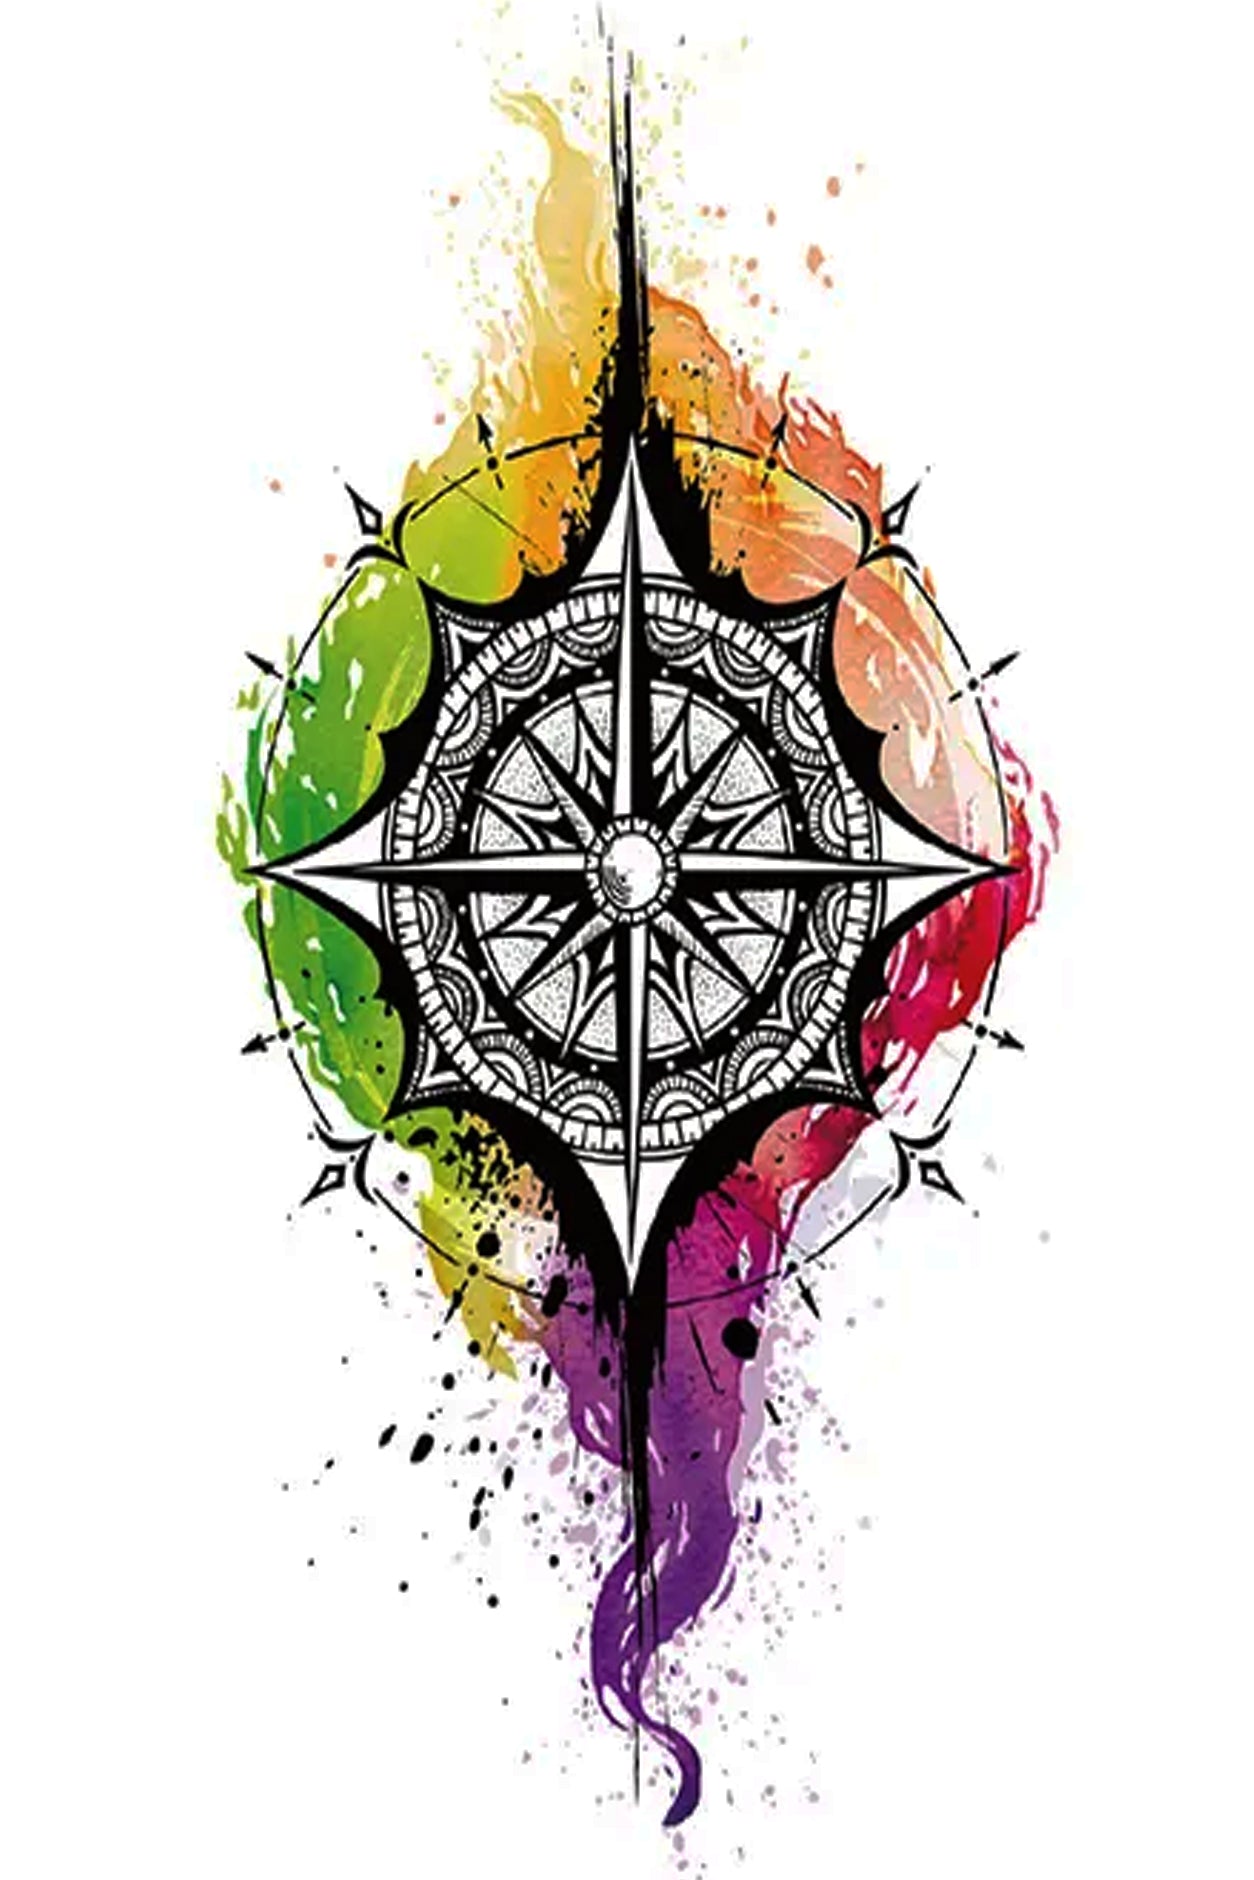 Set your direction right with this nautical star medallion compass surrounded by flowing rainbow waters.  Only you know that the road you take is the right road for you! Creatively wear this artwork on any part of your body, arm, leg, torso, or shoulder.